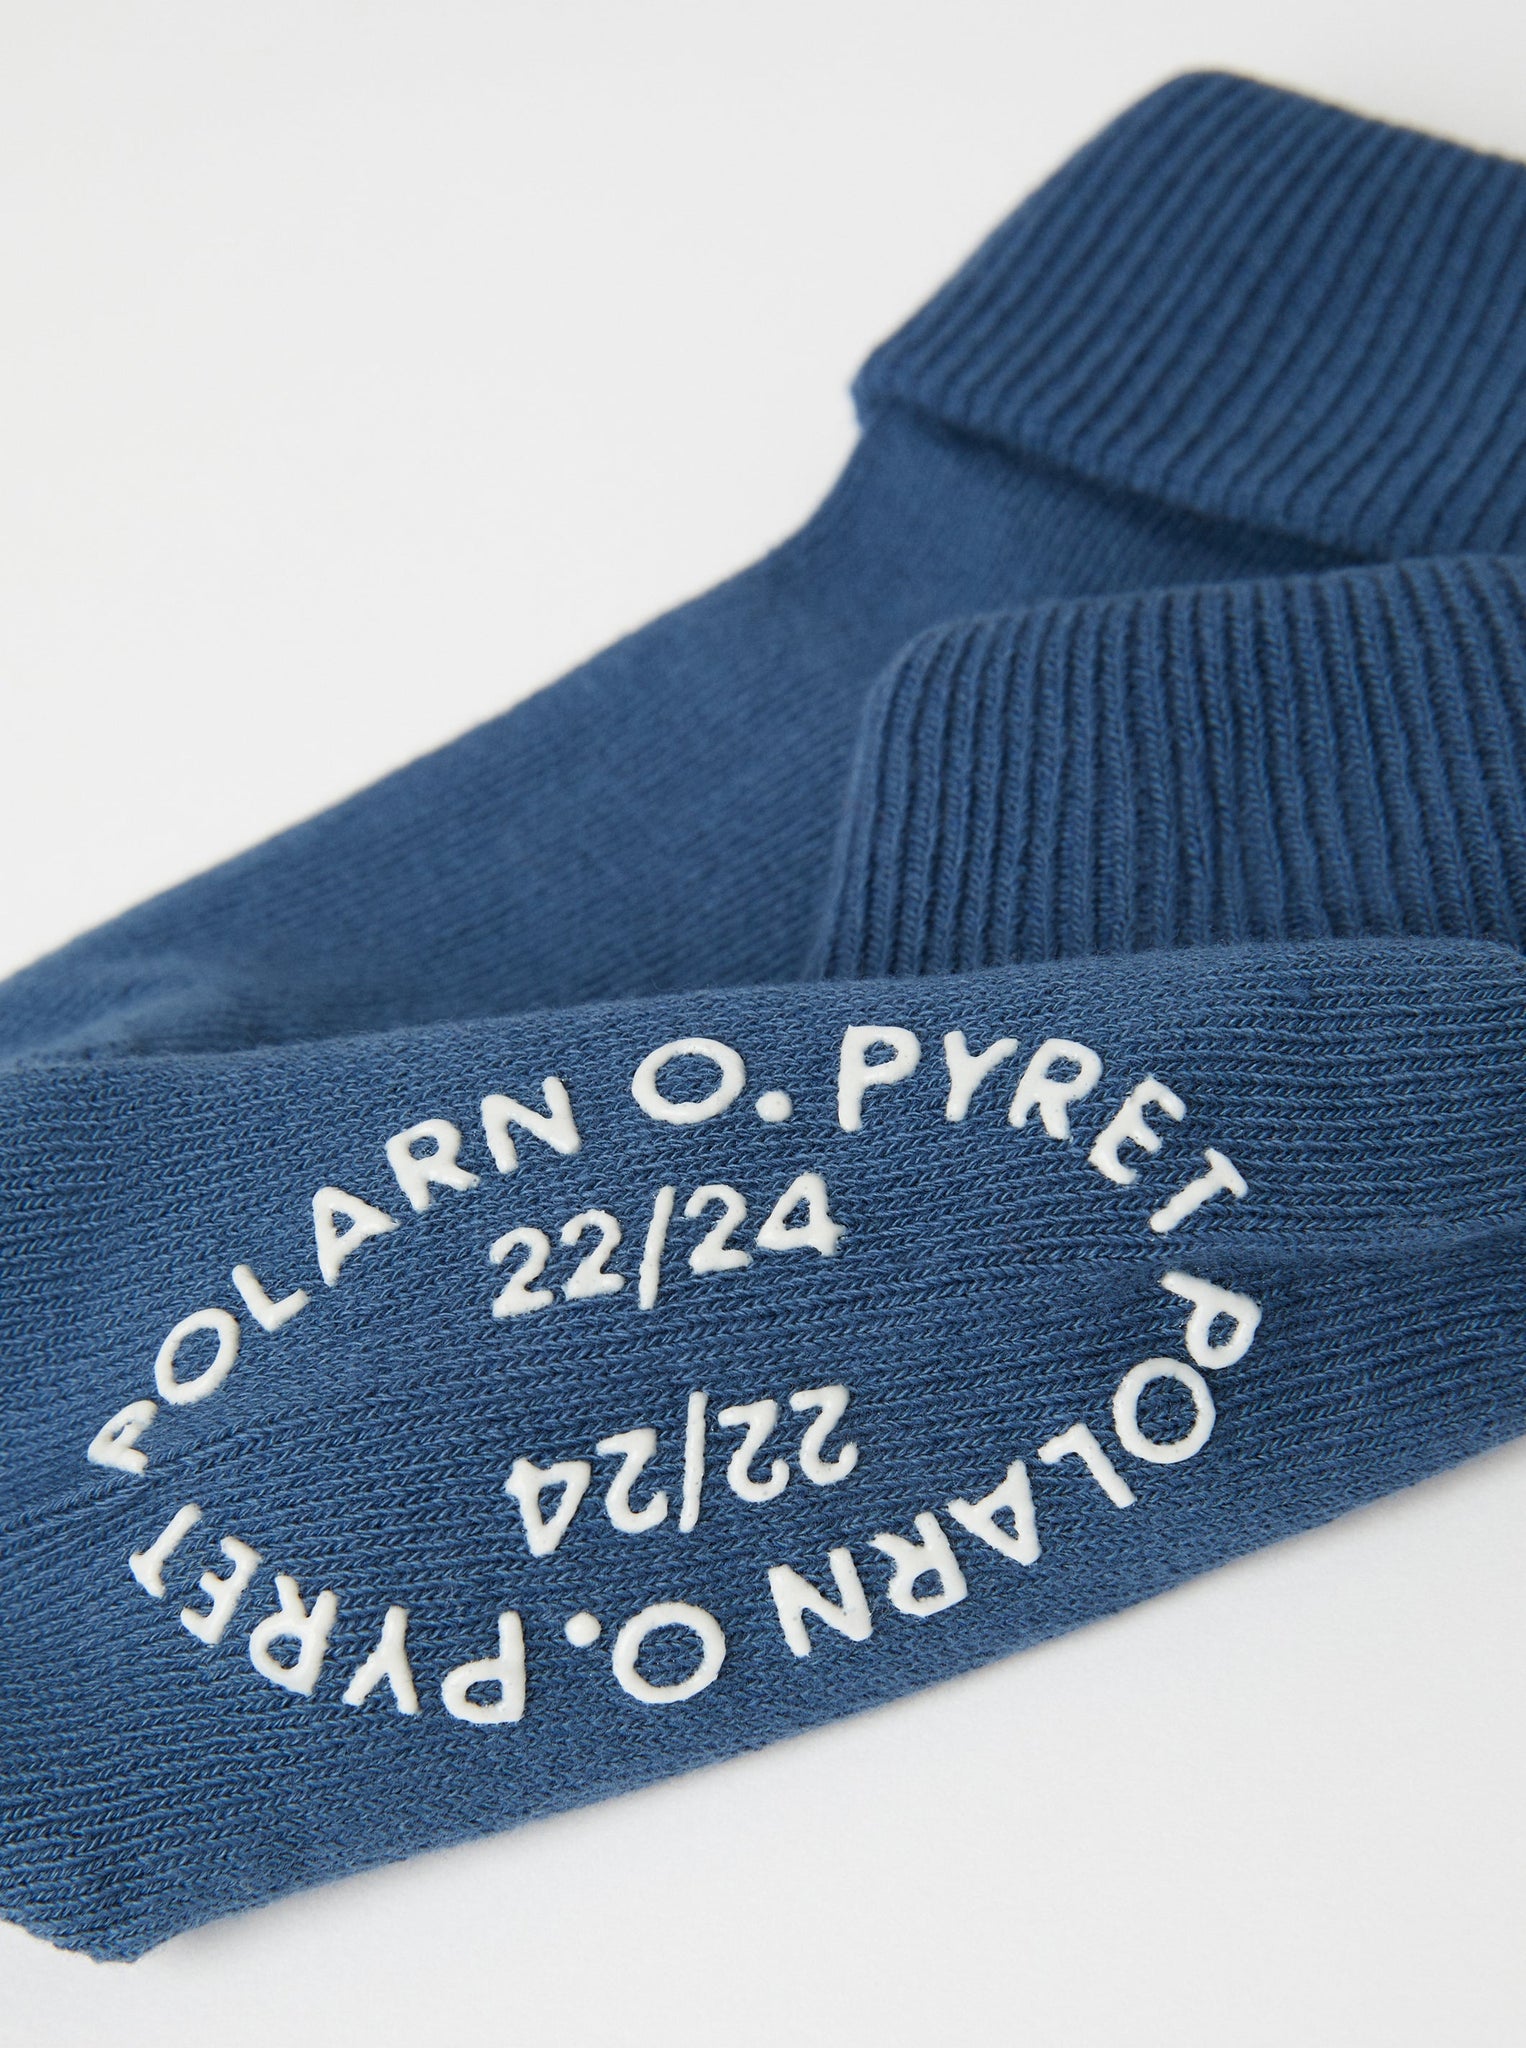 Two Pack Blue Antislip Kids Socks from the Polarn O. Pyret kidswear collection. Ethically produced kids clothing.